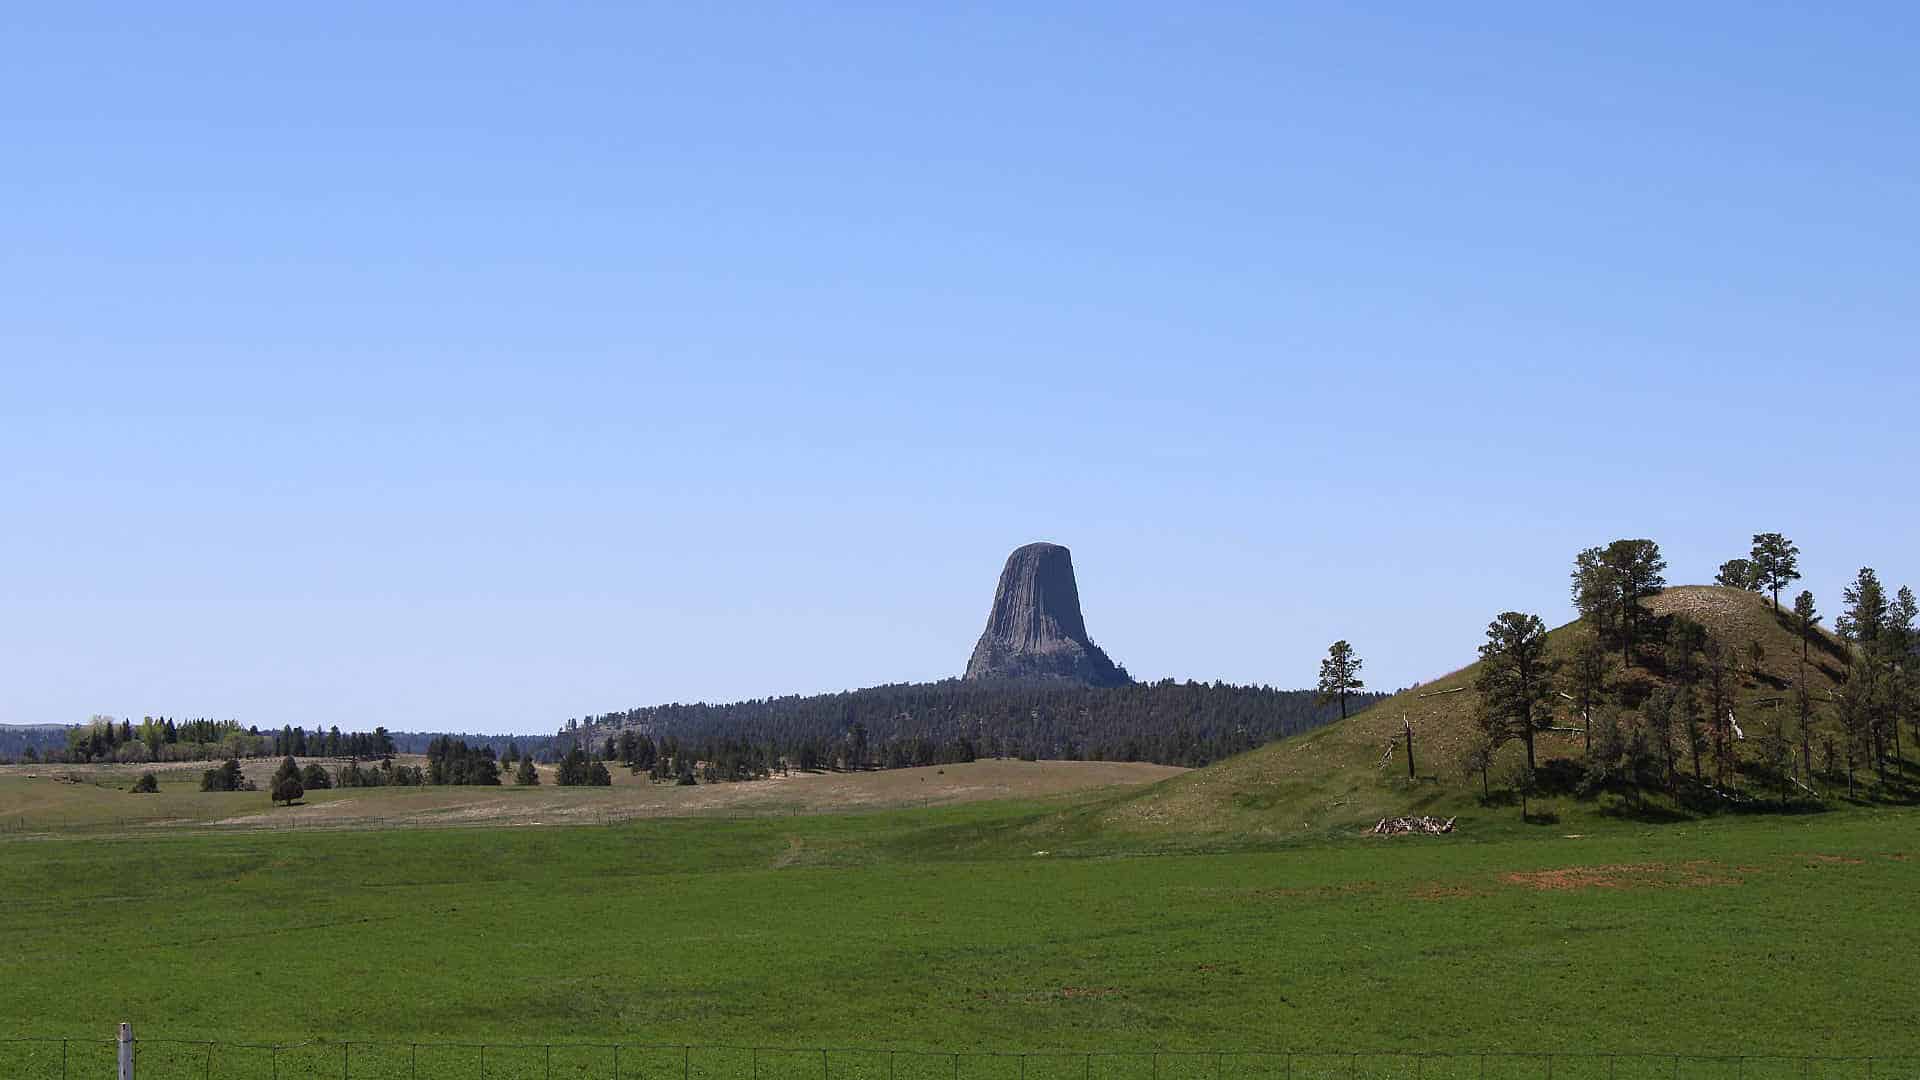 Area around New Haven, Wyoming, showing Devil's Tower National Monument in the distance